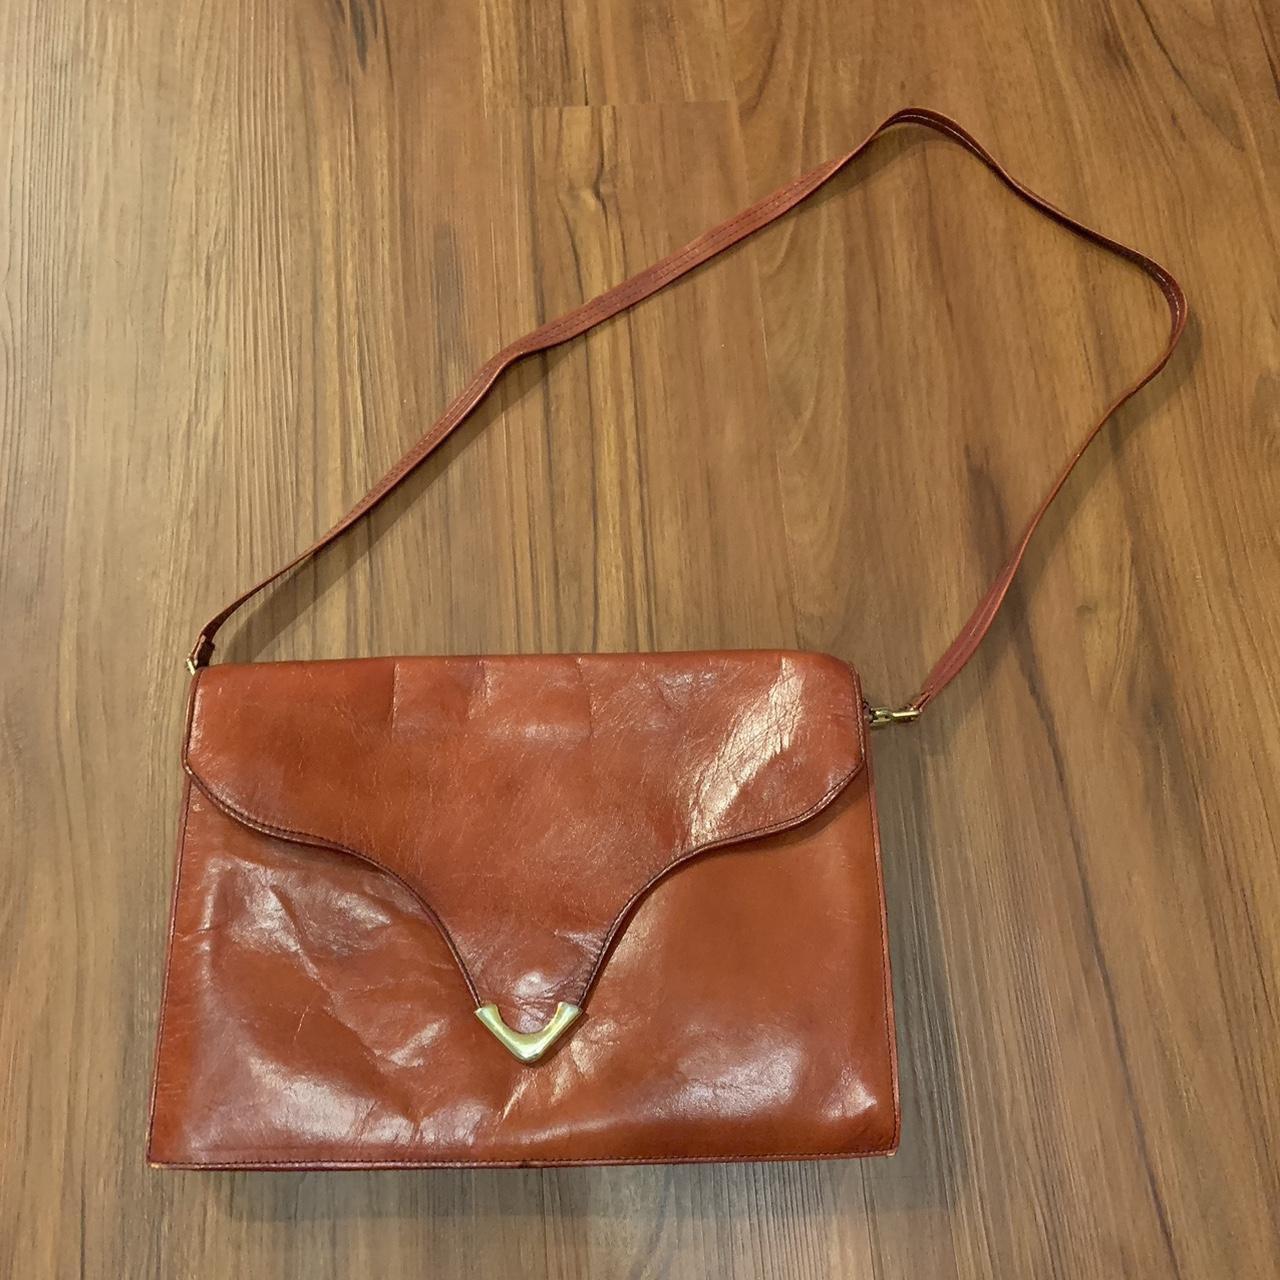 Northstyle Leather Purse Satchel Style With Multiple Pockets Rust Saddle  Color | eBay